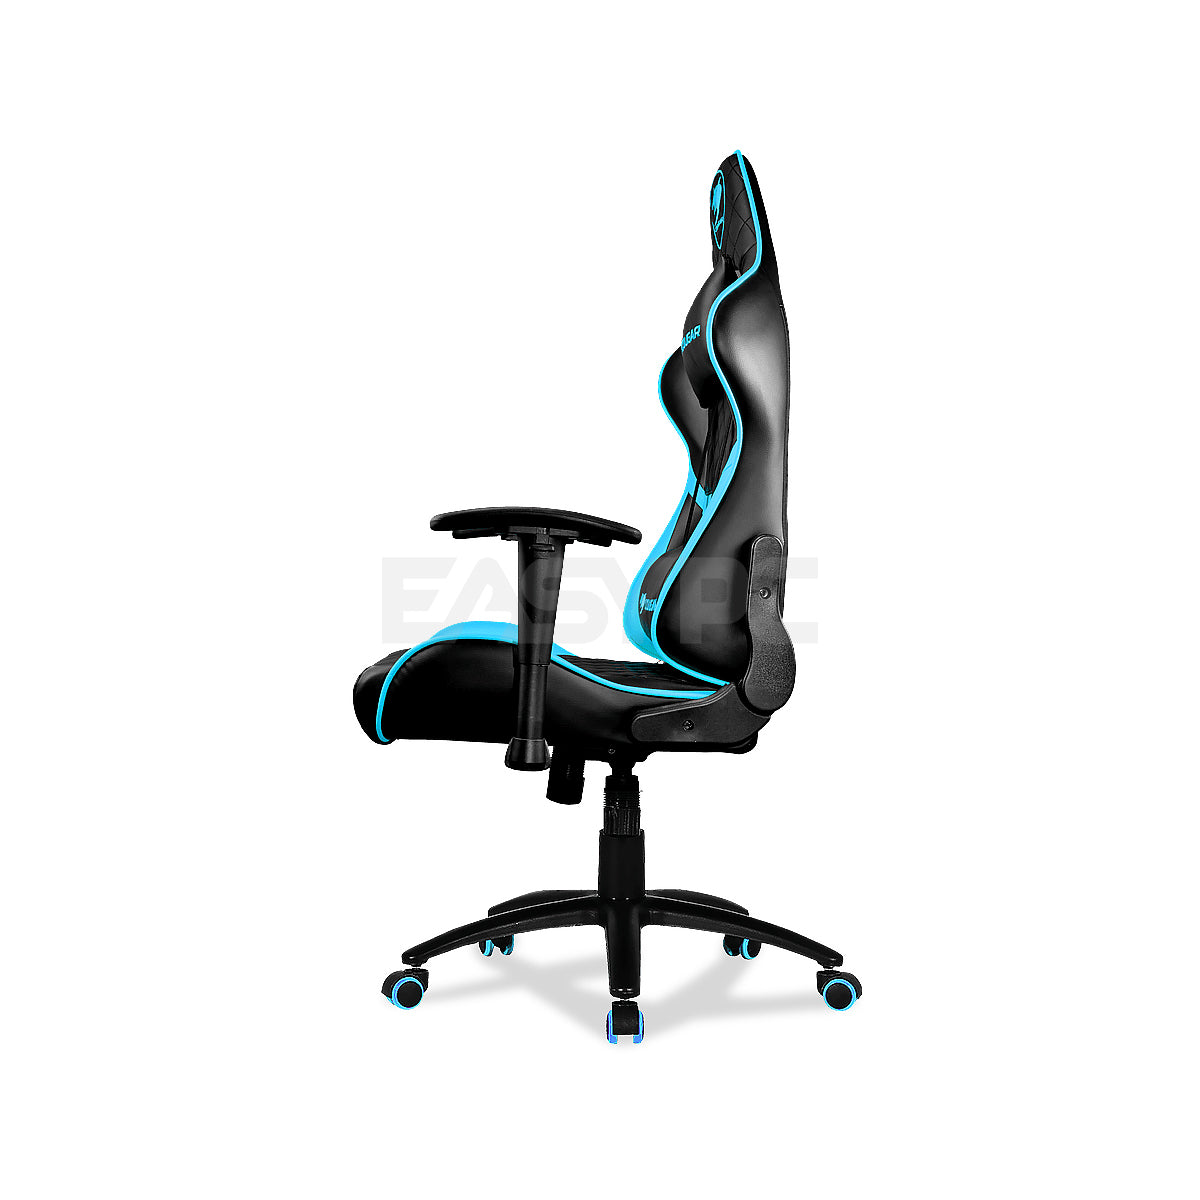 Cougar Armor One Gaming Chair Black Sky Blue-c